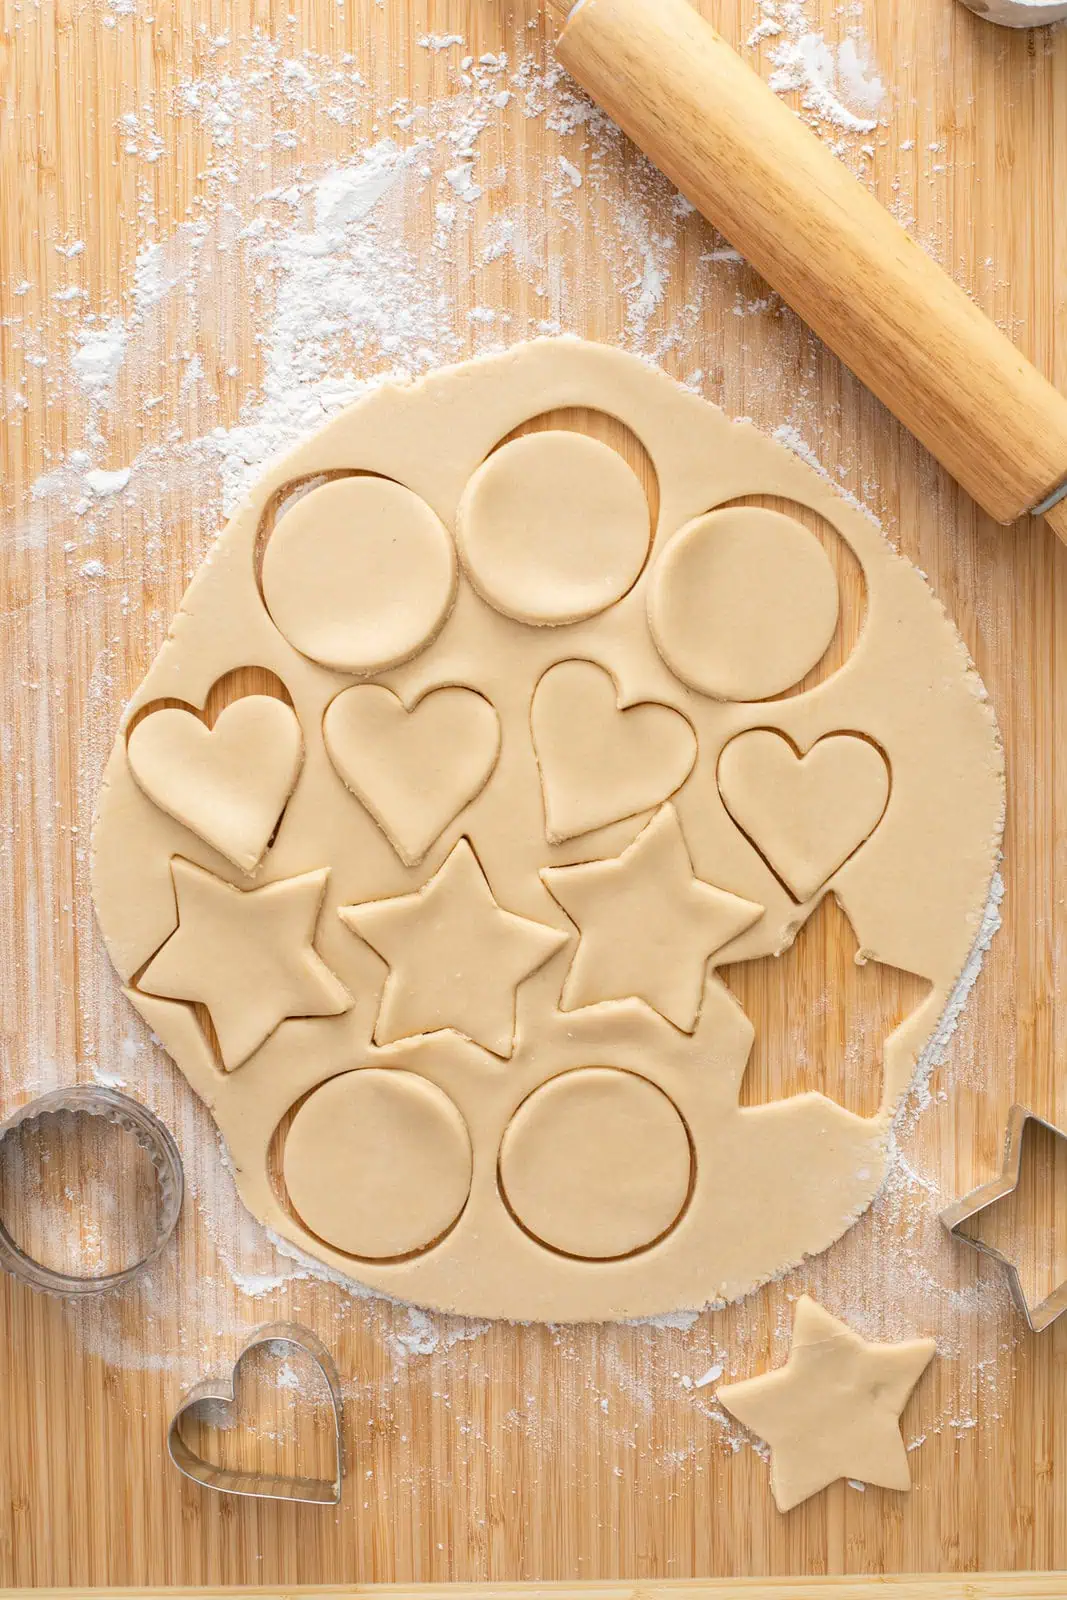 Shapes cut out of a circle of no chill sugar cookie dough on a floured board.